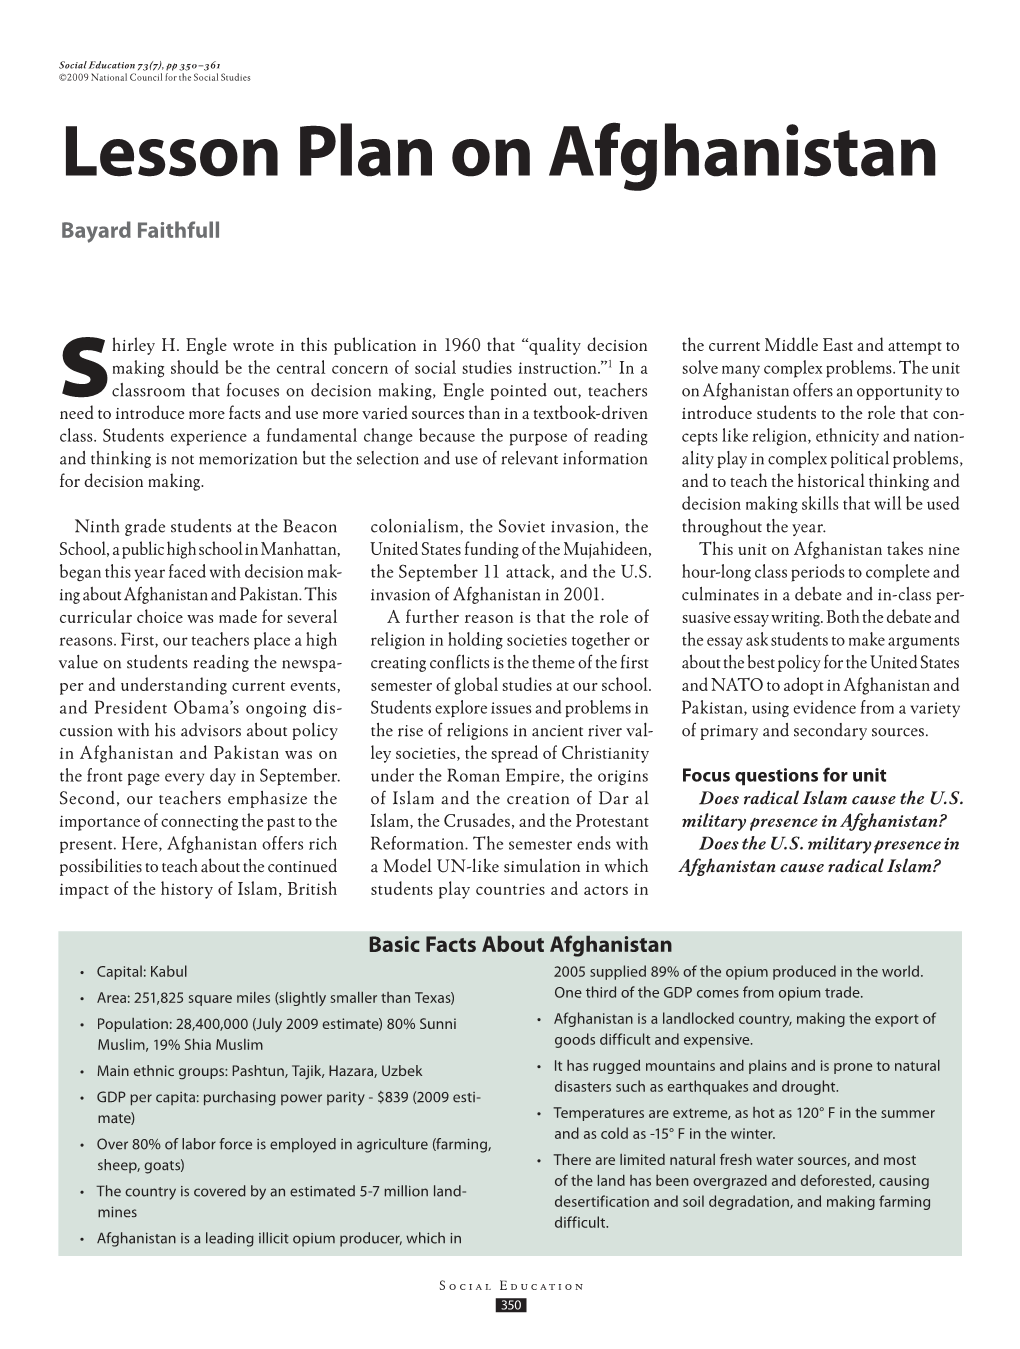 Lesson Plan on Afghanistan